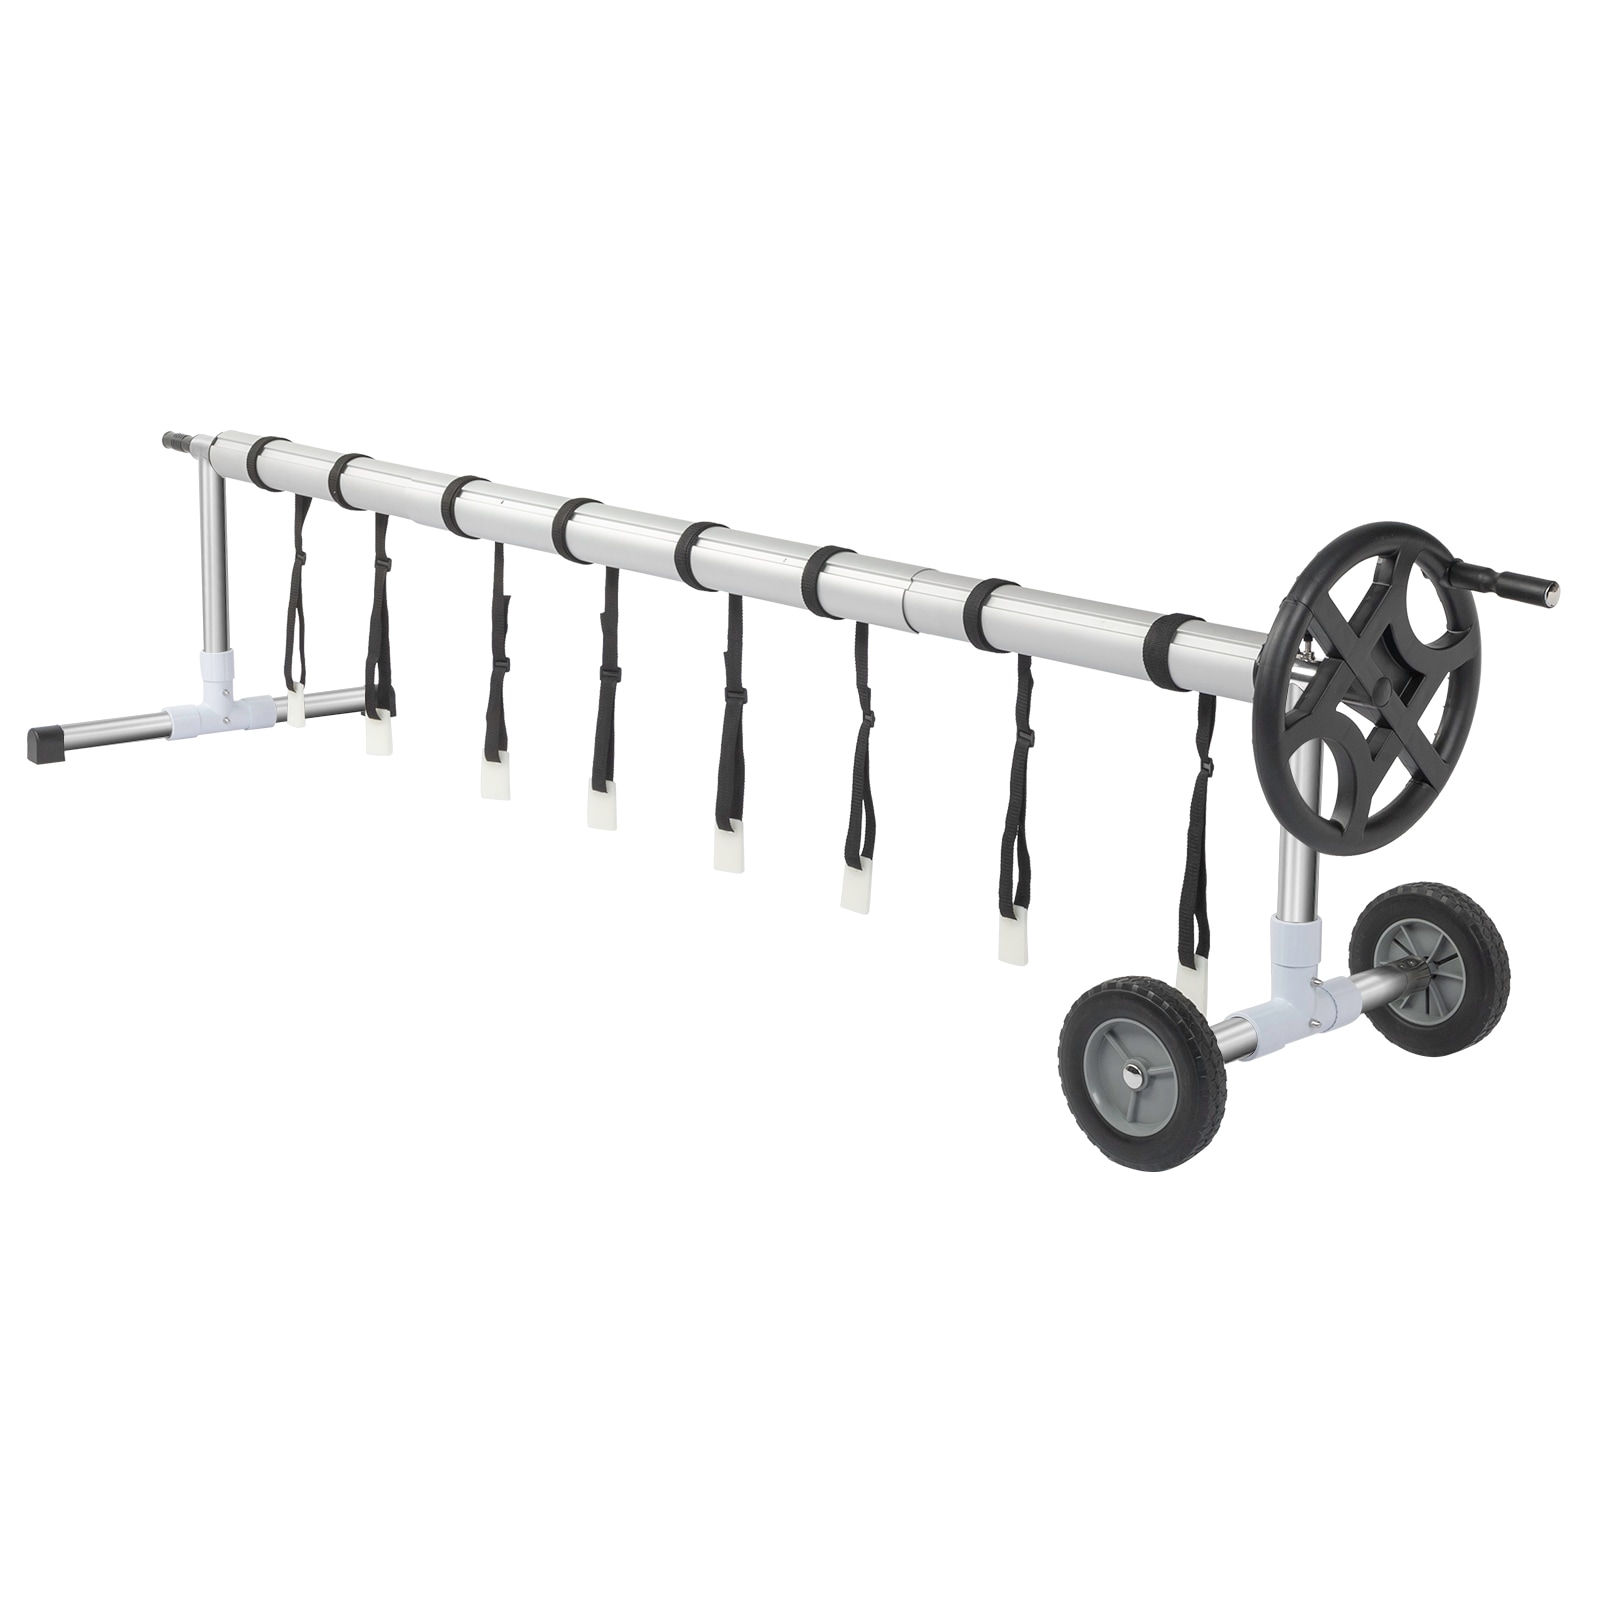 25-Foot Wide Stainless Steel Solar Cover Deluxe Reel System | Works with  8-Mil & 12-Mil Heating Blankets | Perfect for In-Ground or Above-Ground